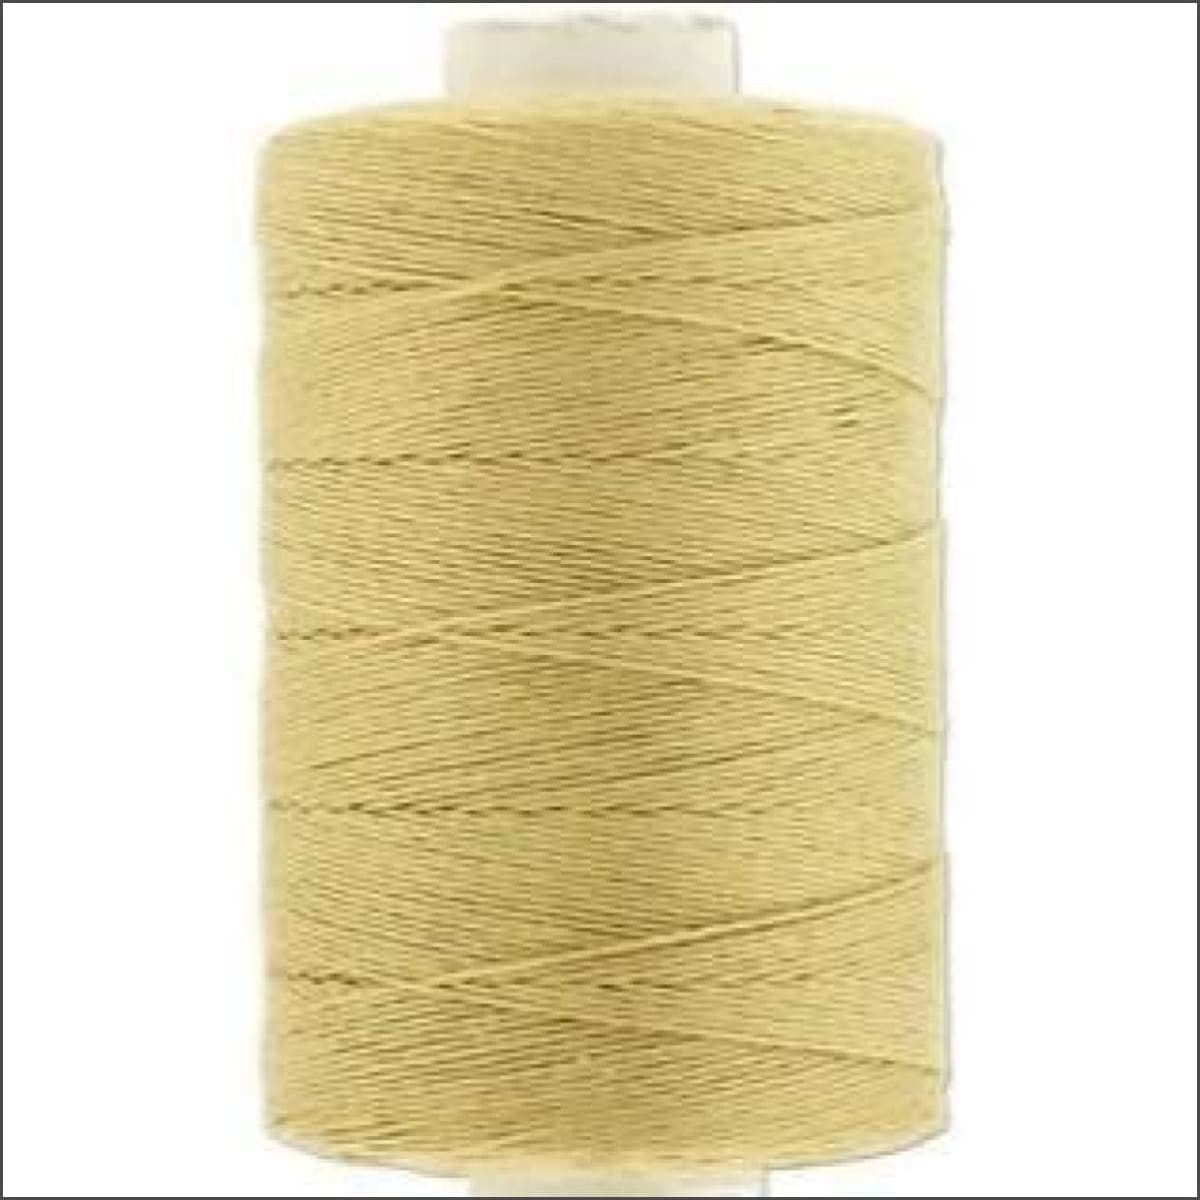 Sewing Weaving Thread- 400m Length Sewing Weaving Thread Lqqks 400m Large Blonde 